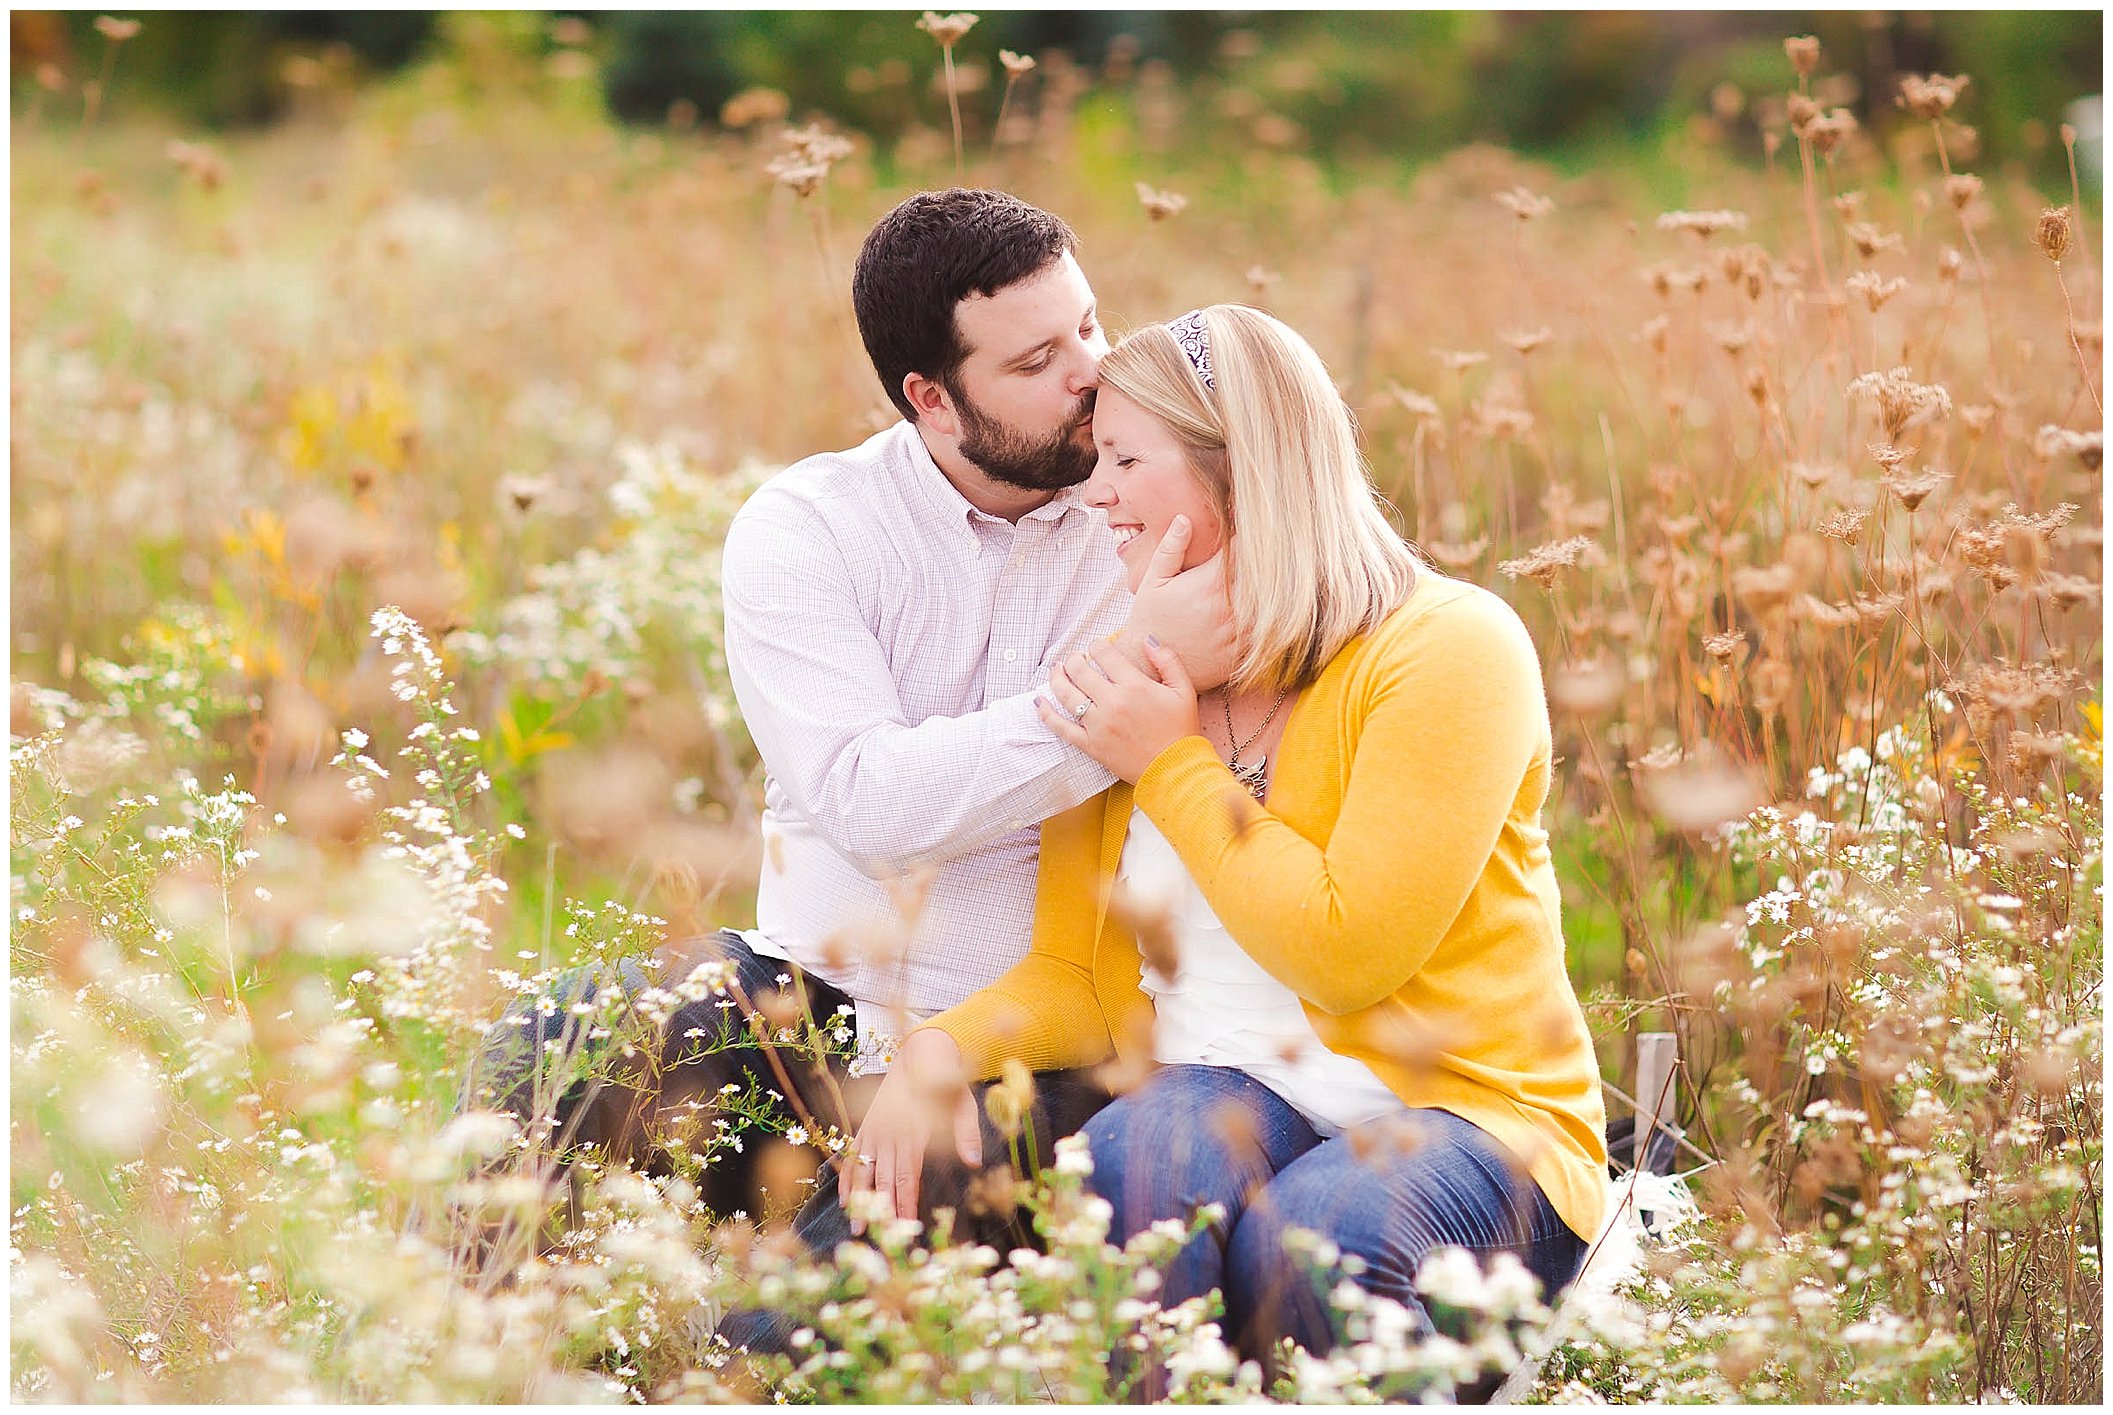 Sunshine filled engagement session in a field of wildflowers, Fort Wayne Indiana Wedding Photographer_0006.jpg